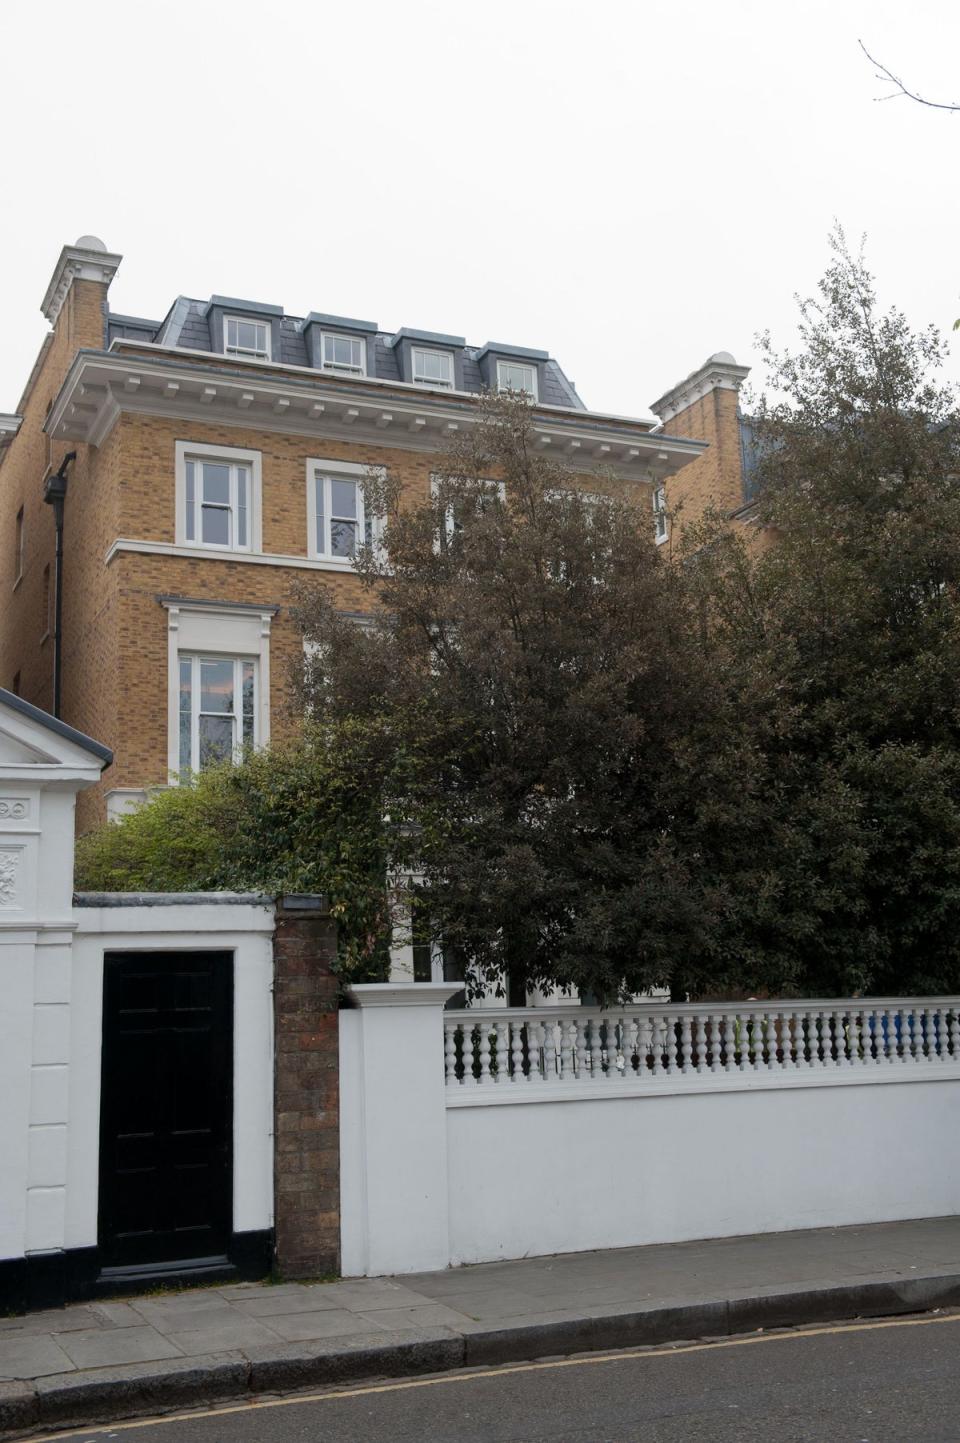 An exterior view of one of the three multi-million pound villas in Boltons Place, Chelsea (GLENN COPUS / Evening Standard)